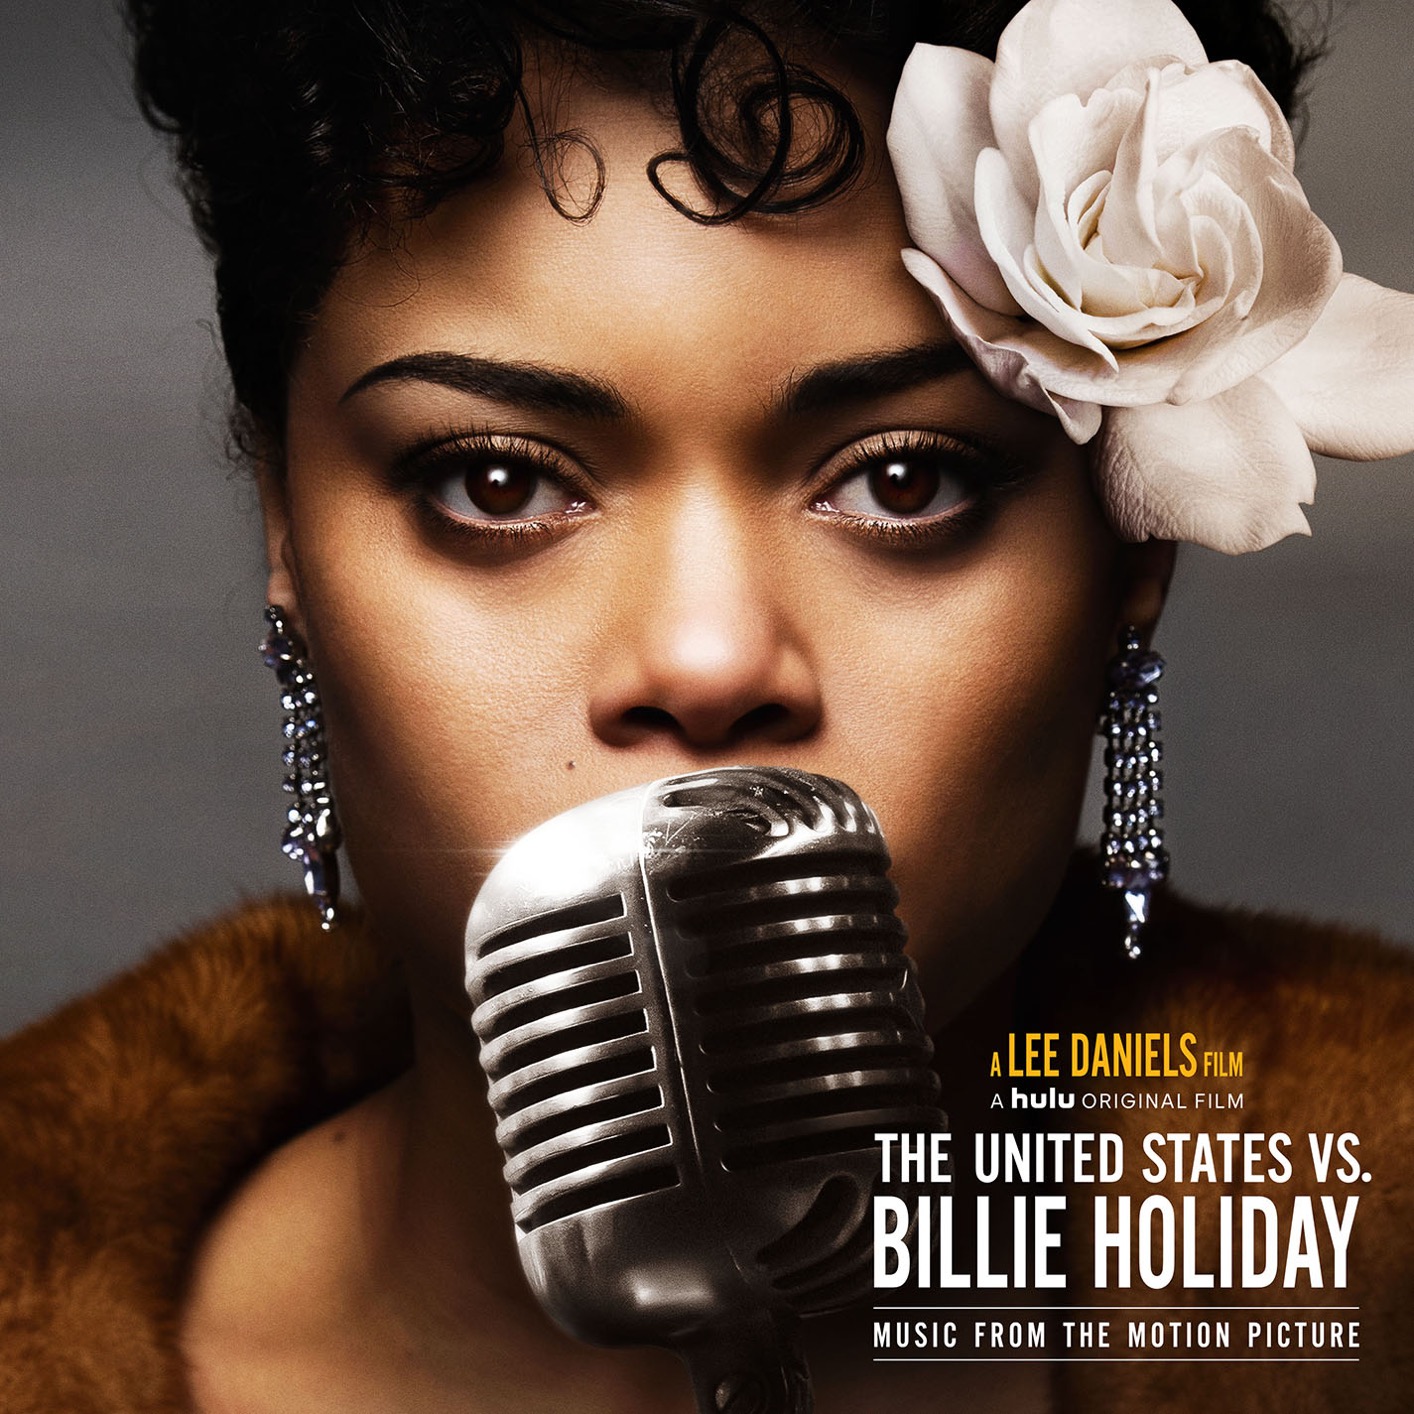 Andra Day - The United States vs. Billie Holiday (Music from the Motion Picture) (2021) [FLAC 24bit/96kHz]